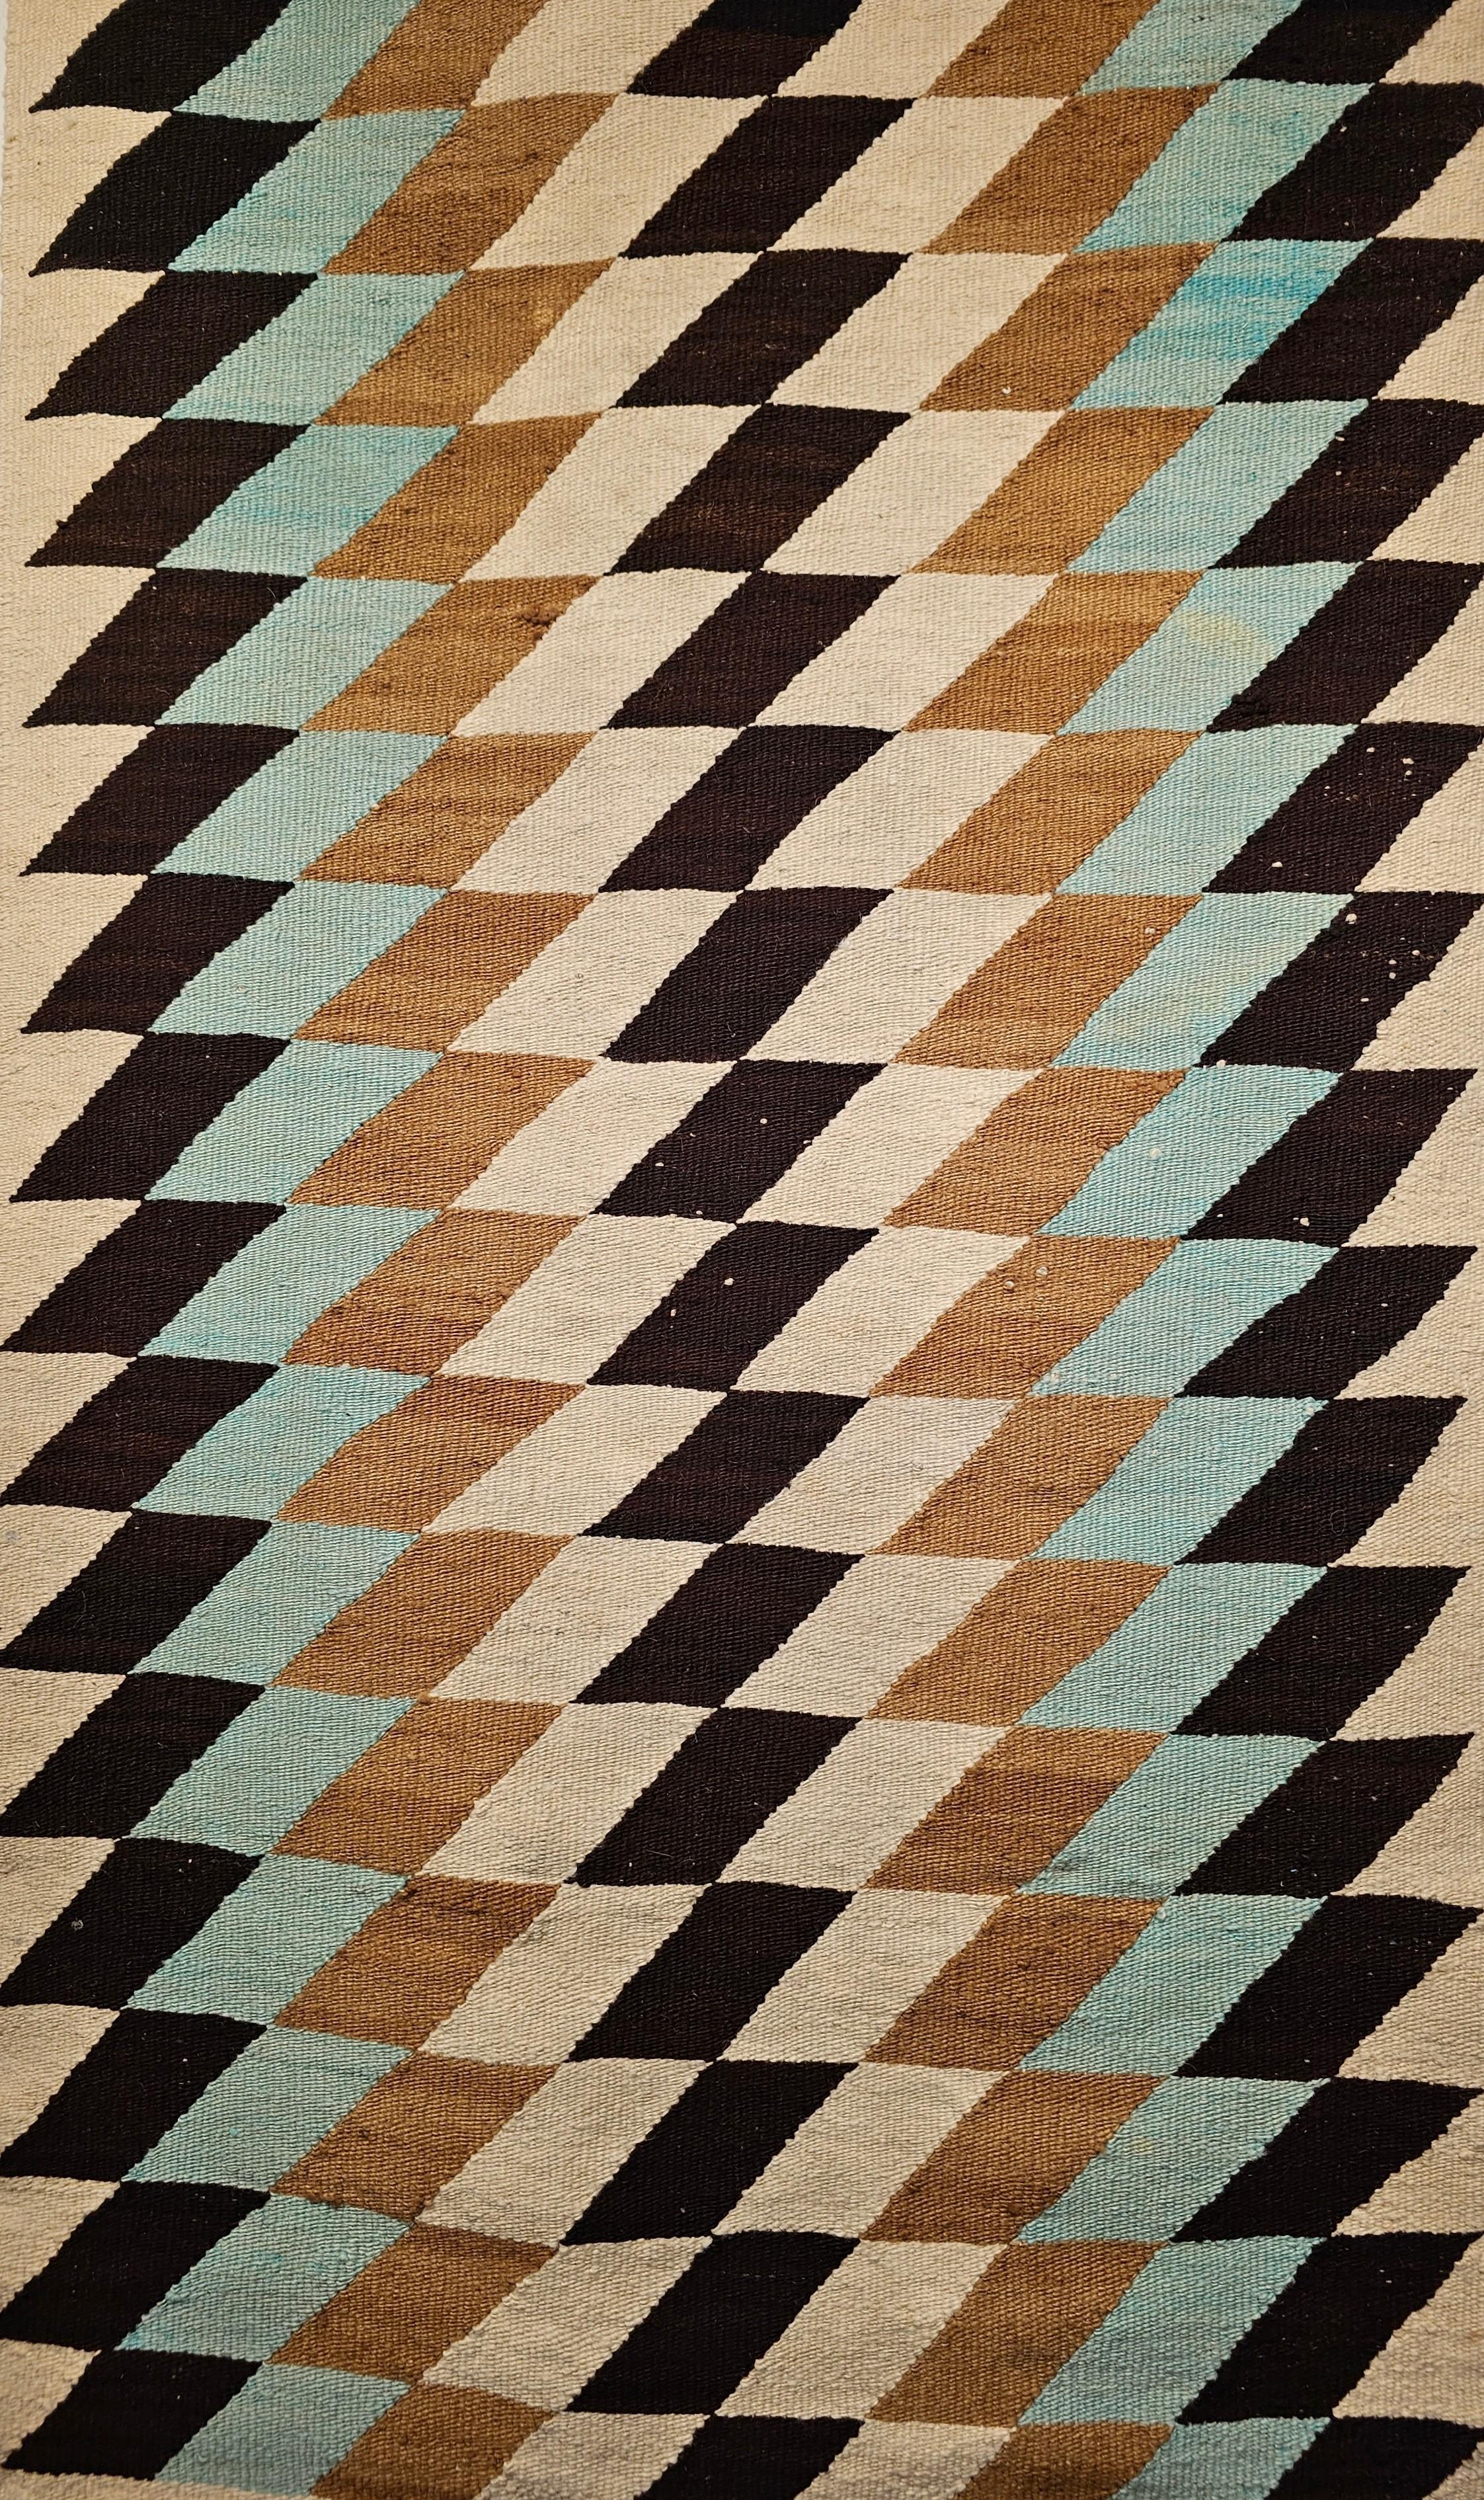 Vintage Native American Navajo rug is in a block pattern from the mid 1900s. The natural colors in this Navajo rug are in beautiful earth tones including turquoise blue, black, ivory, and brown, black, and gray. Navajo weavers use natural organic